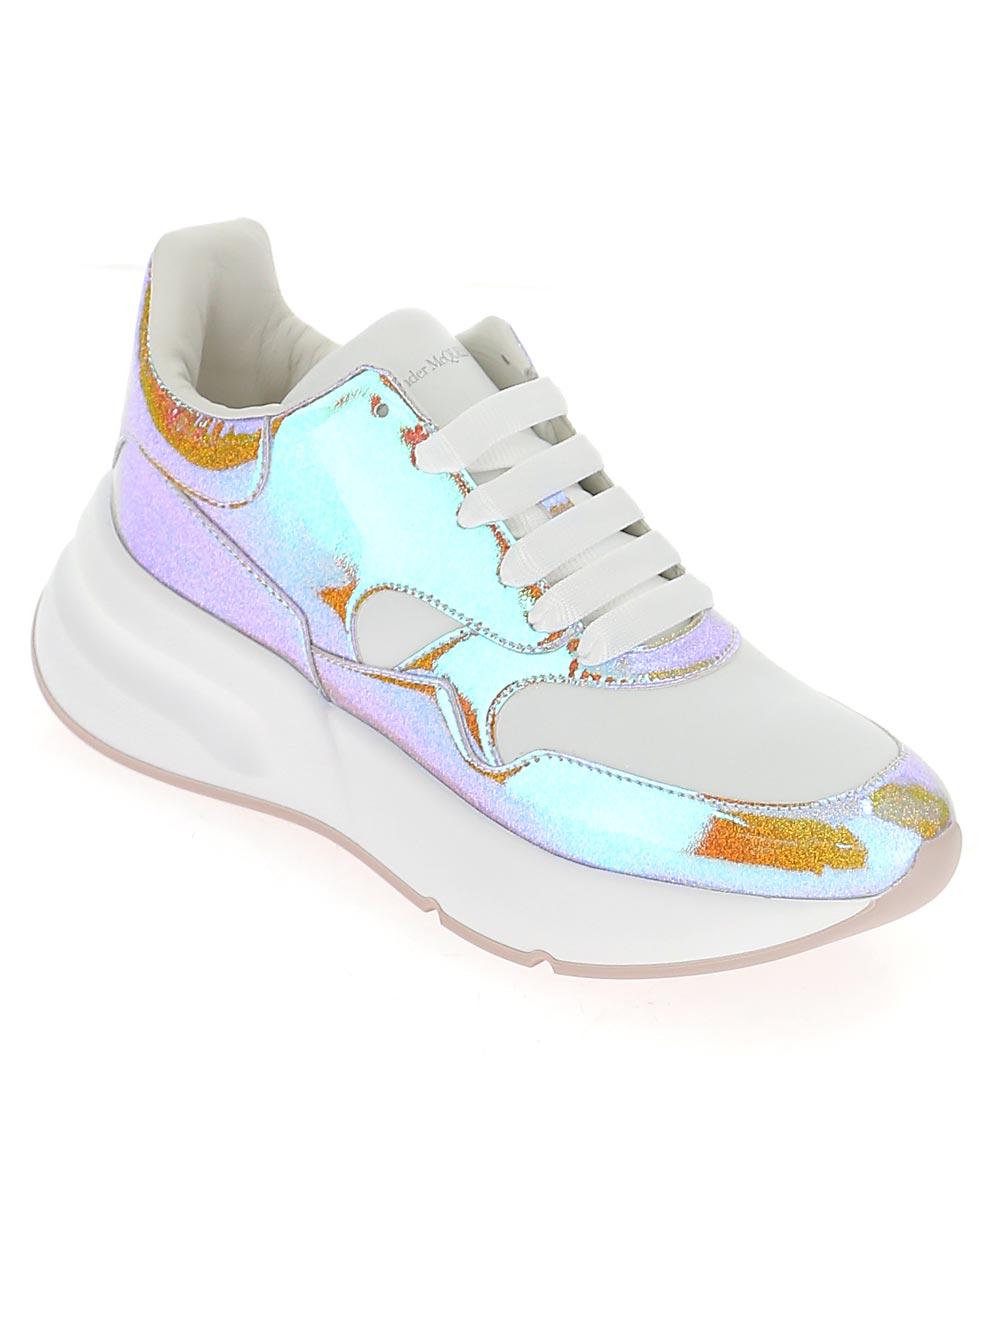 Alexander McQueen Leather Hologram Oversized Sneakers - Save 20% - Lyst